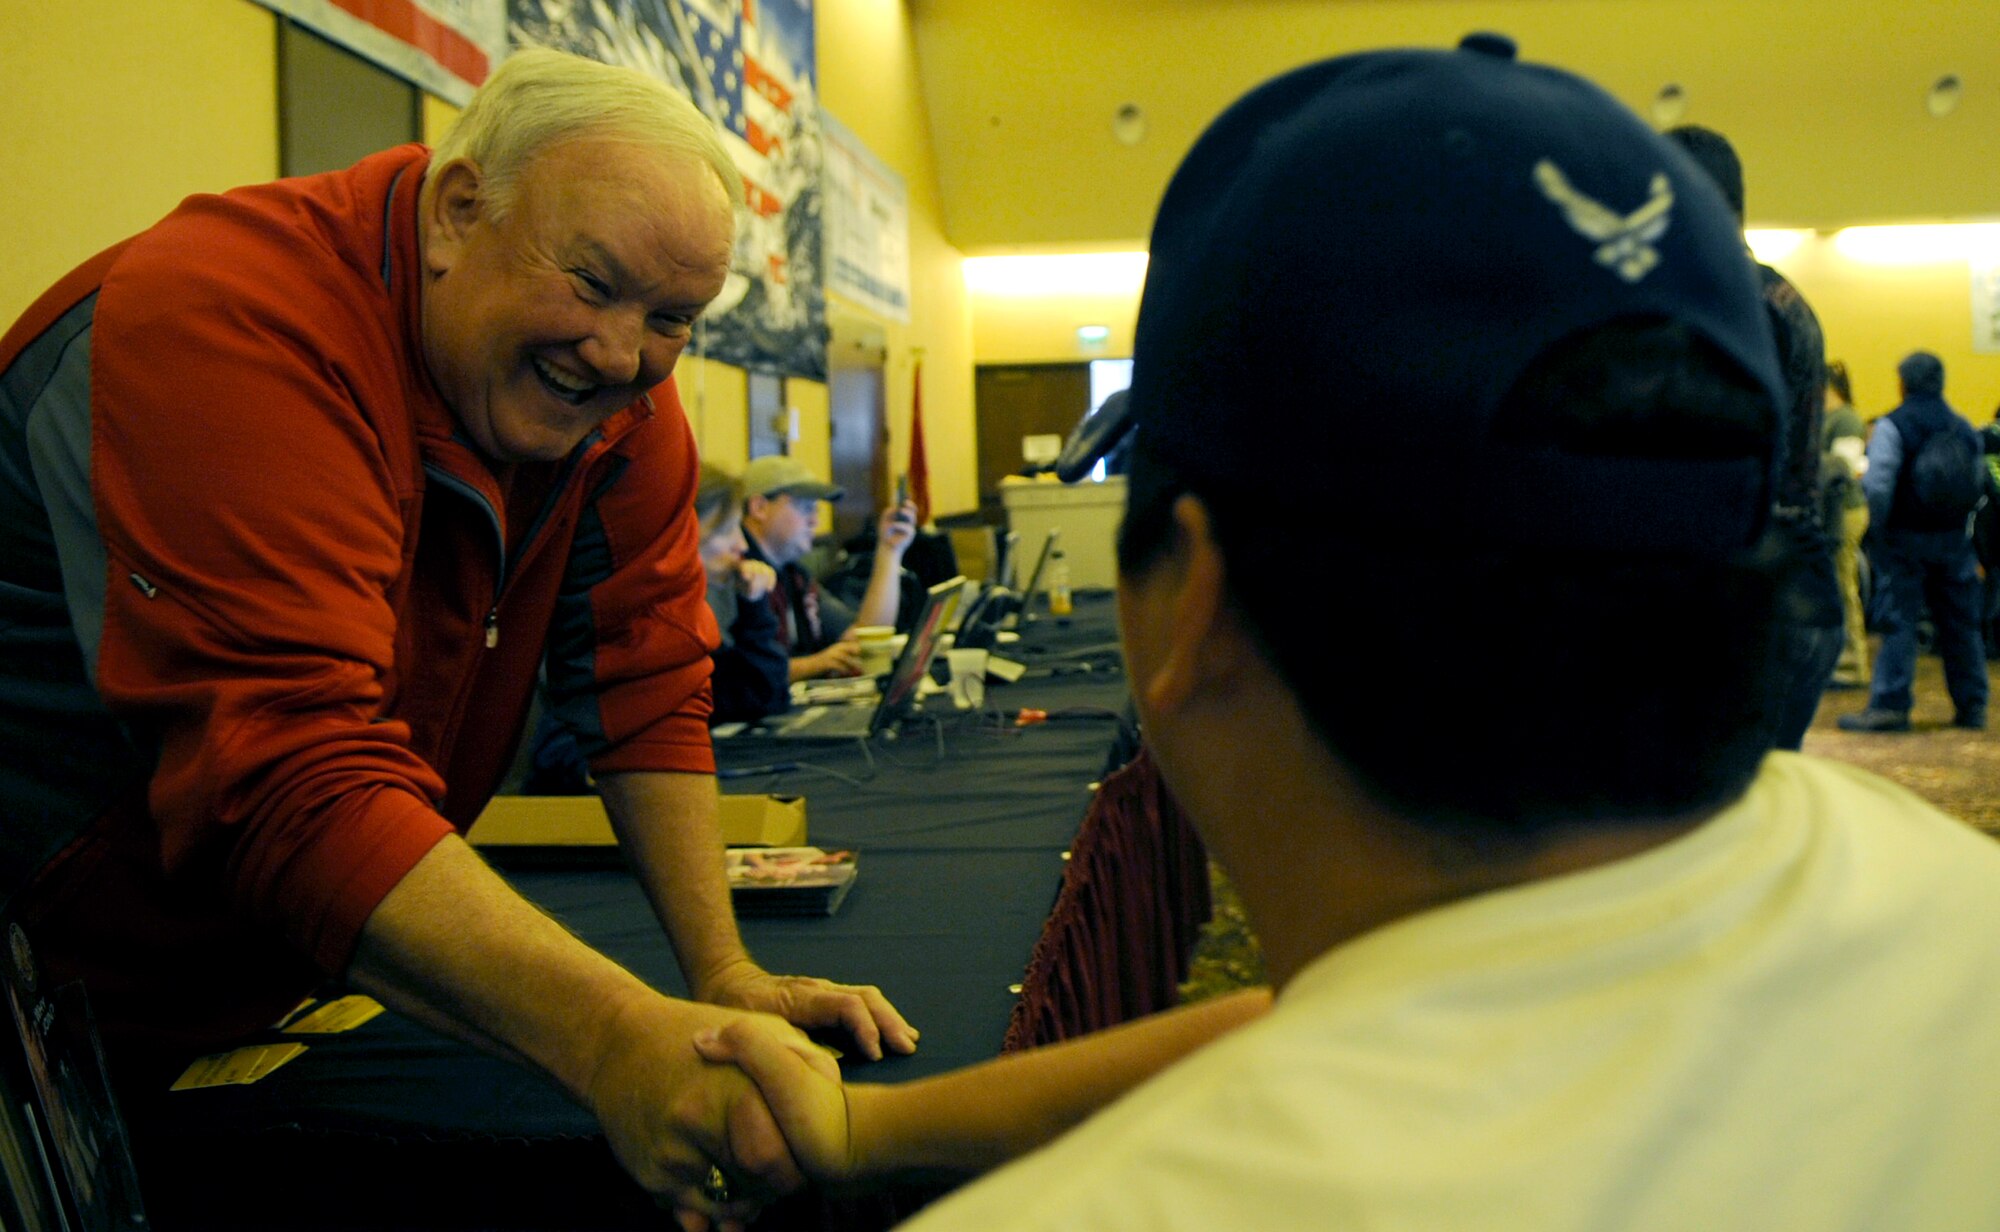 Senior Airman Kevin Krogh shakes hands with Larry Barnett inside The Silver Tree Hotel March 29 during registration for the 23rd National Disabled American Veterans Winter Sports Clinic in Snowmass Village, Colo. Airman Krogh lost both legs in a major car accident in 2007 and this will be his first year attending the sports clinic. Airman Krogh is assigned to Fort Sam Houston in San Antonio. Mr. Barnett is a former umpire in Major League Baseball. (U.S. Air Force photo/Staff Sgt. Desiree N. Palacios)
